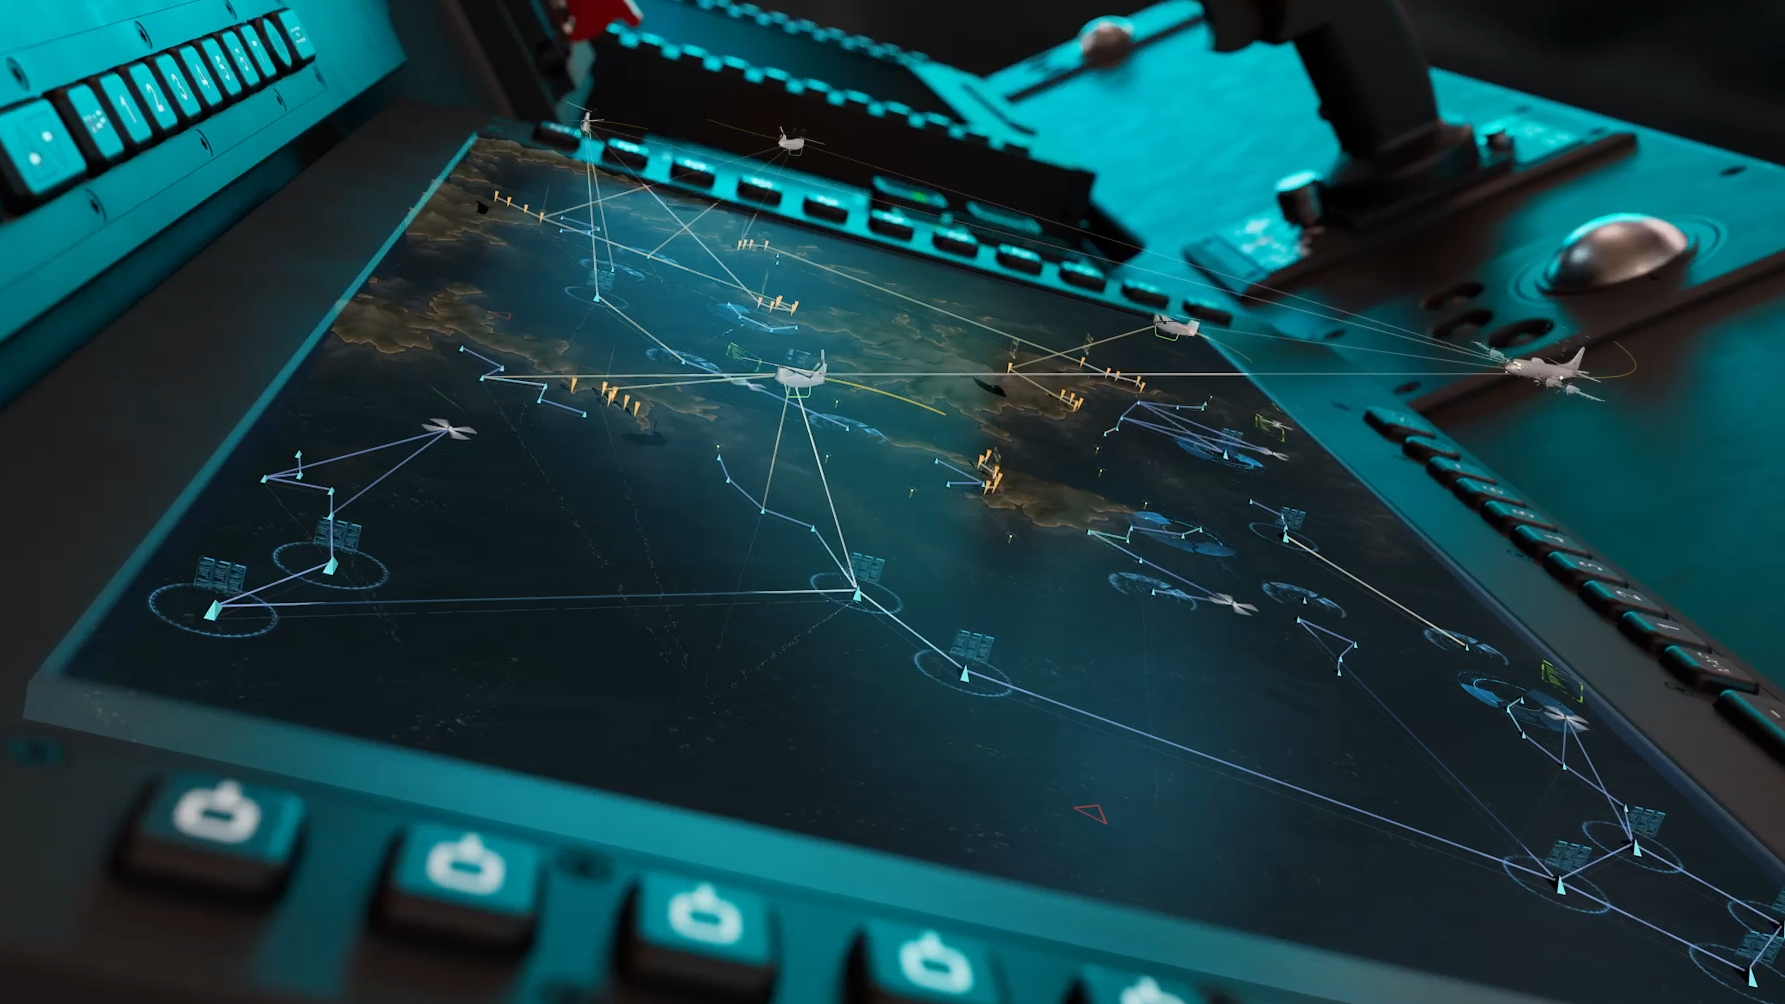 Mapping system projected above aircraft console